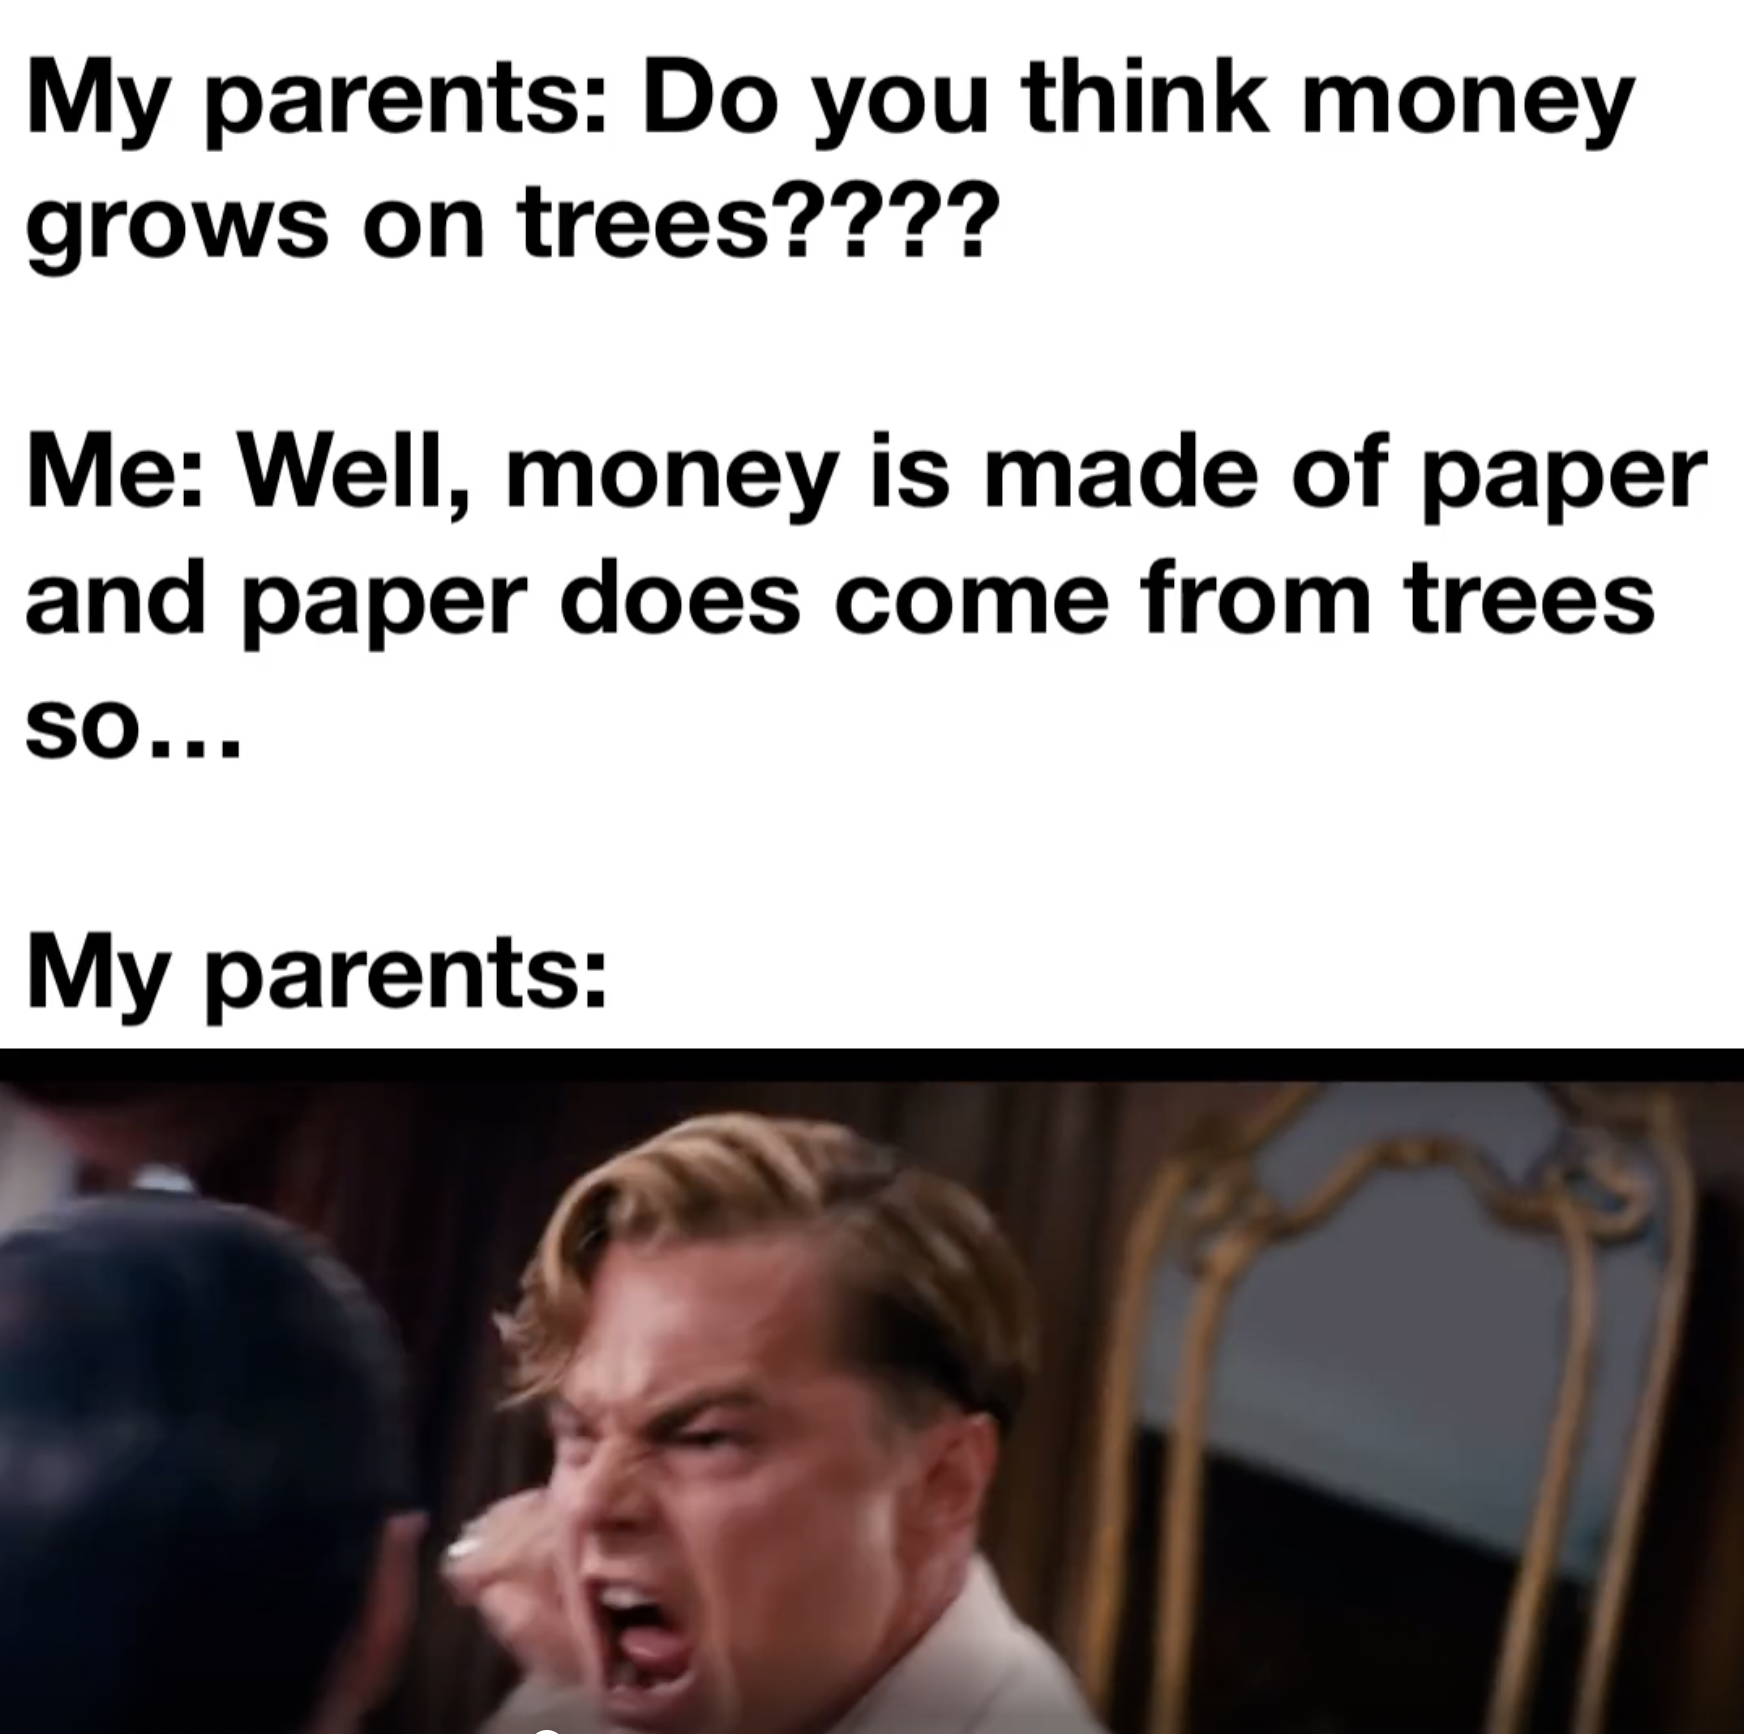 photo caption - My parents Do you think money grows on trees???? Me Well, money is made of paper and paper does come from trees So... My parents